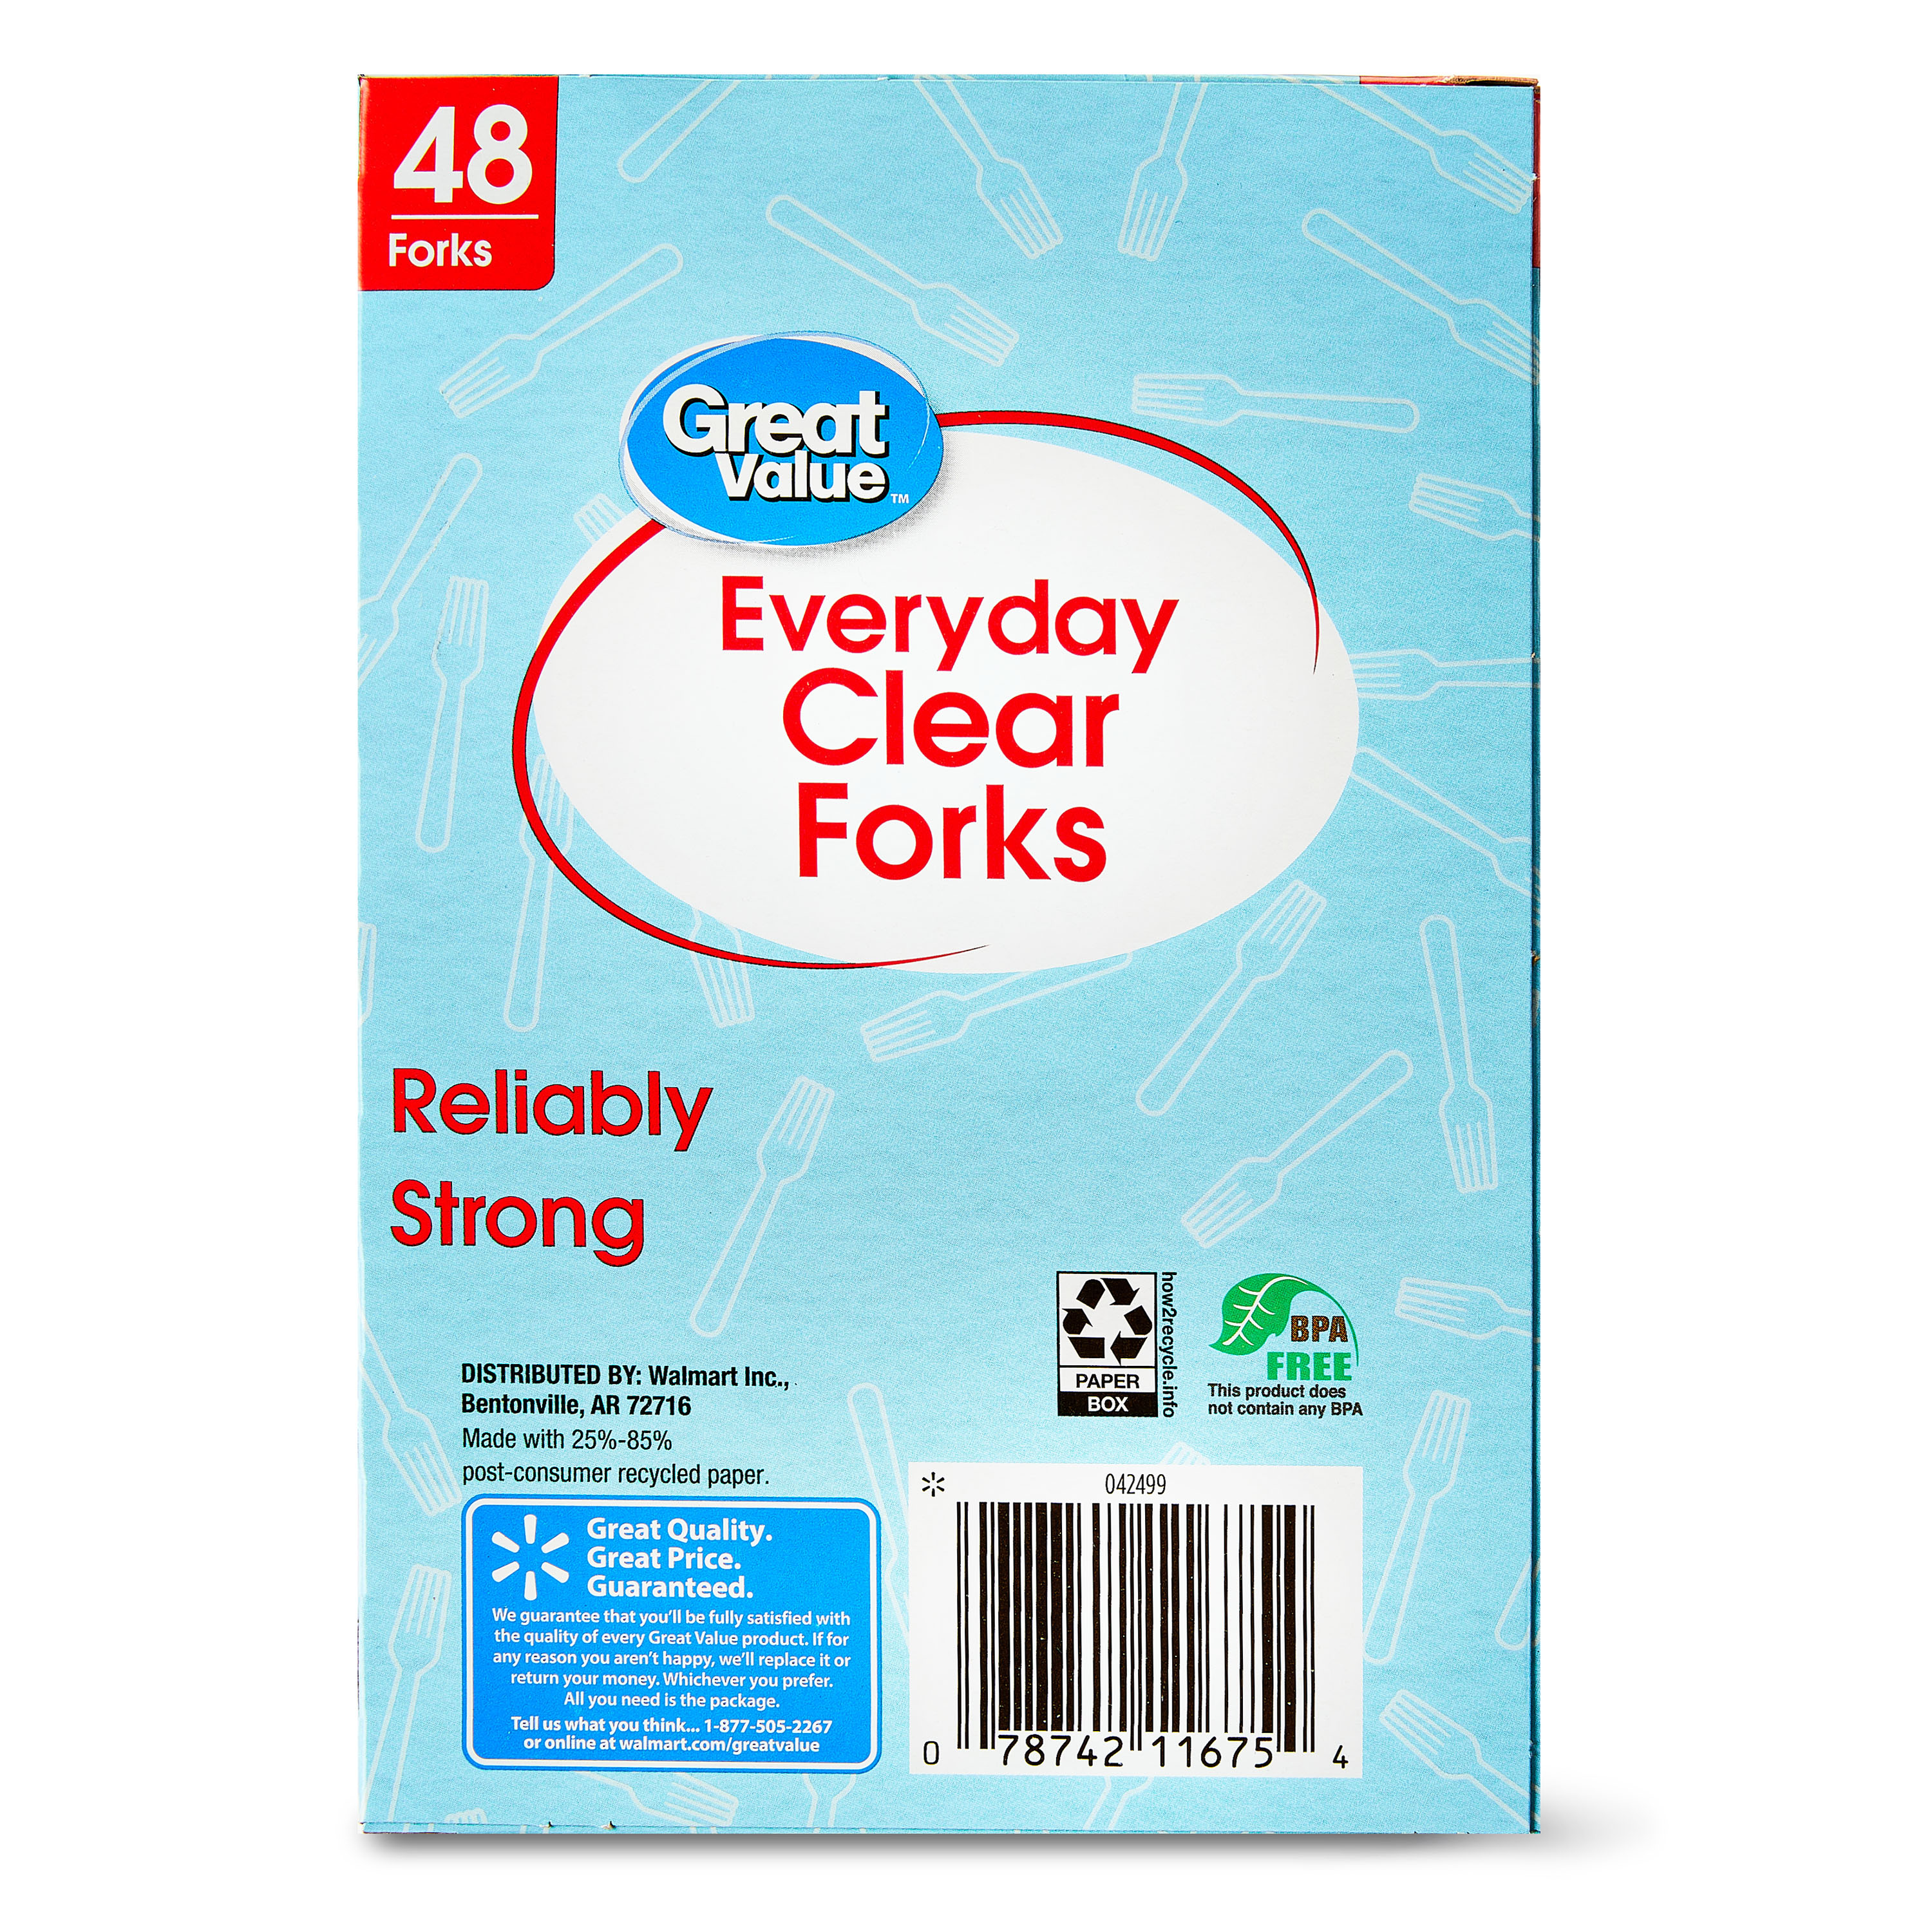 Great Value Premium Clear Disposable Plastic Forks, Clear, 48 Count - image 5 of 7